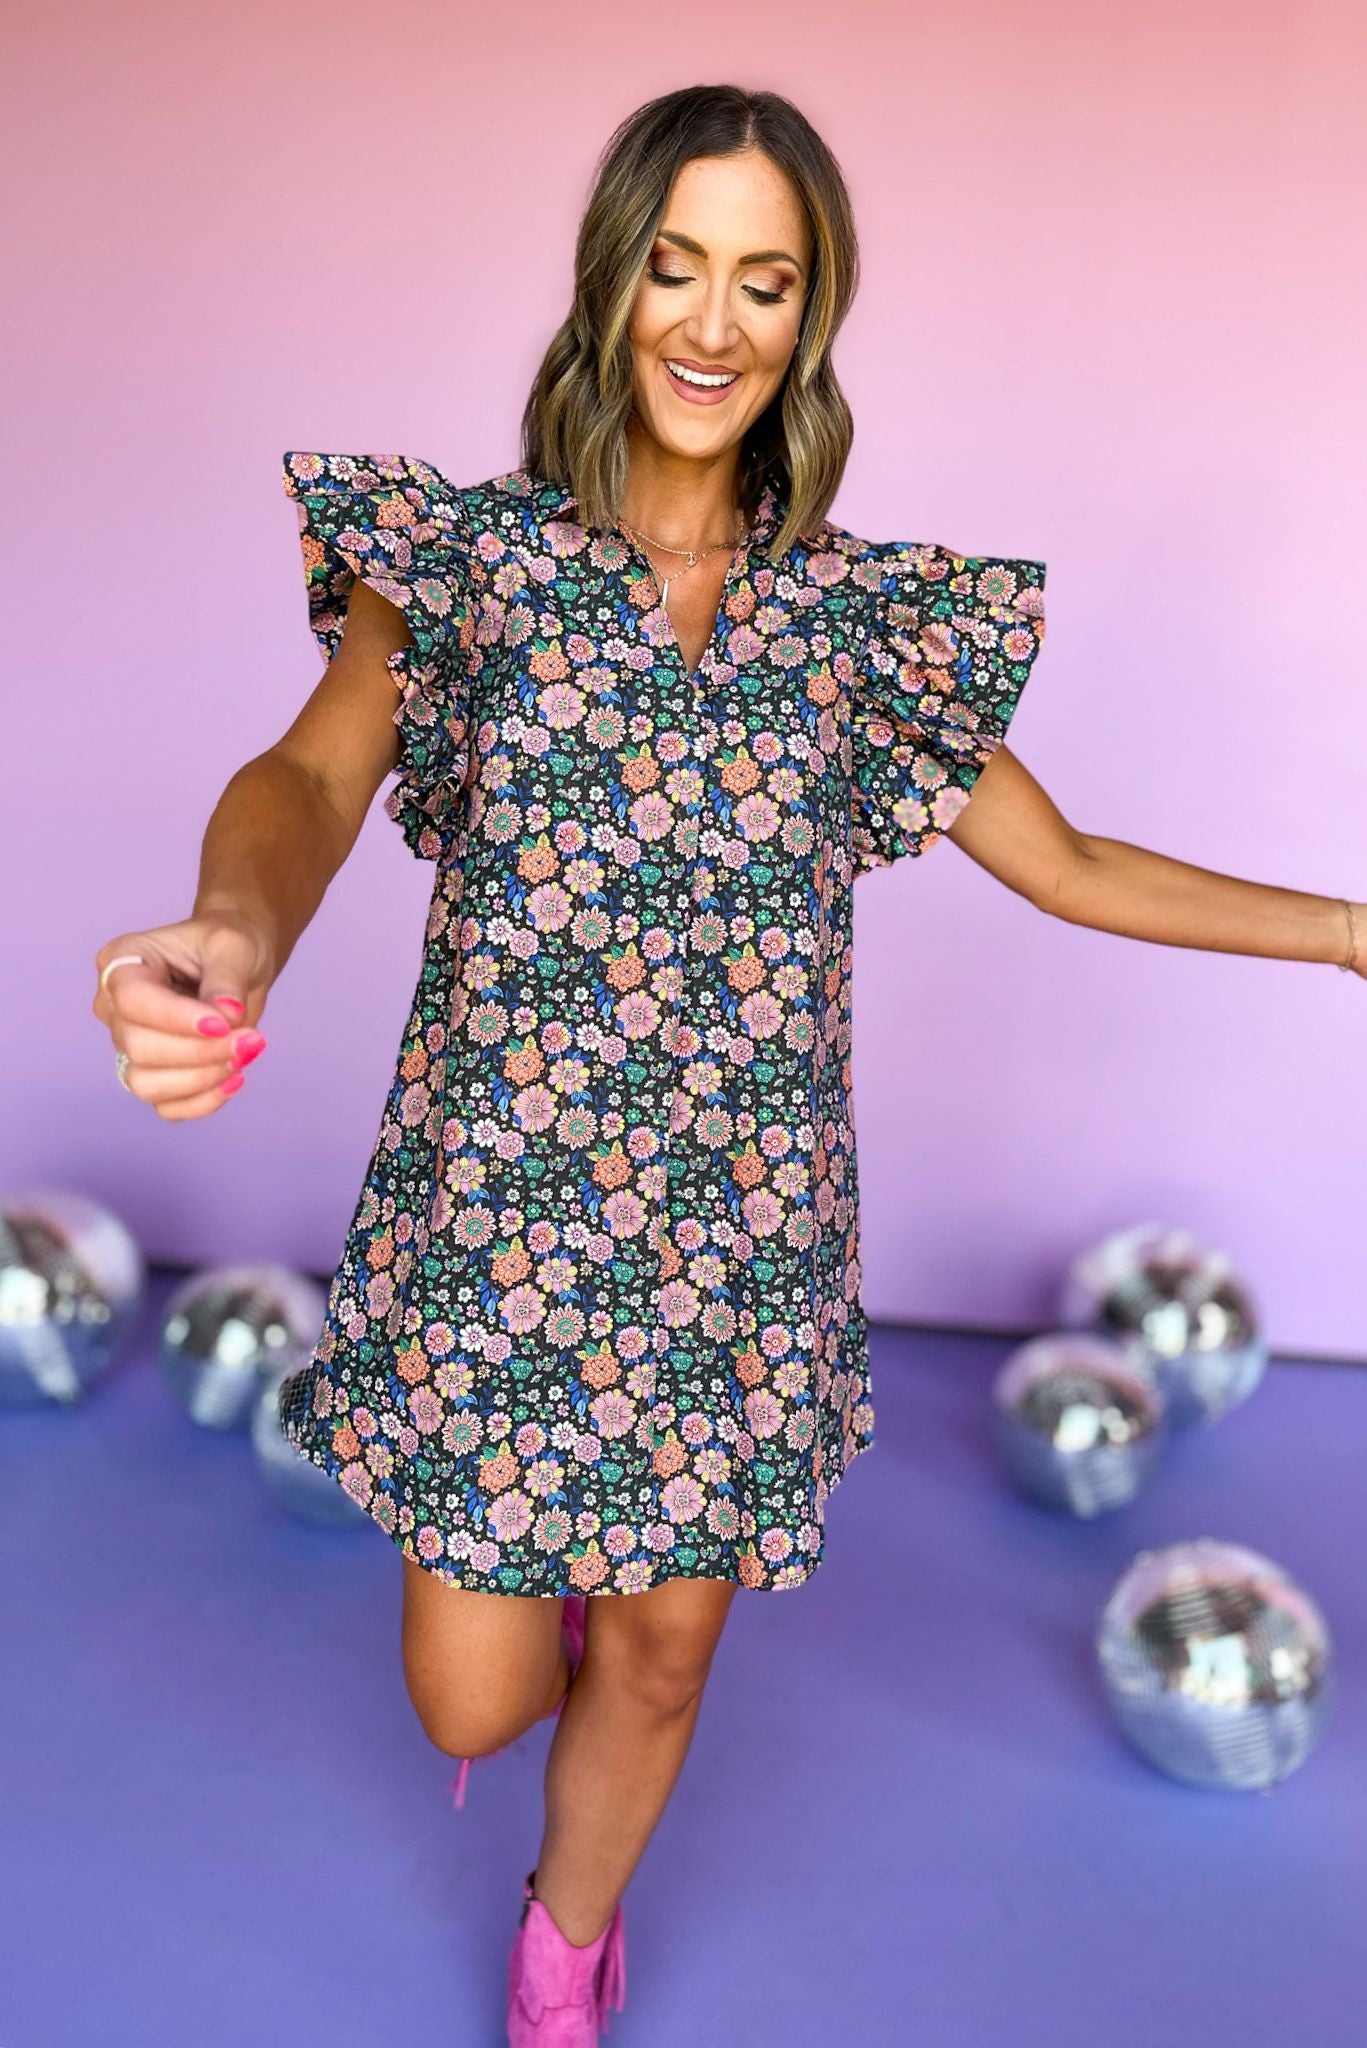 SSYS Floral Print Ruffle Shoulder Poplin Dress, SSYS the Label, elevated style, elevated dress, printed dress, ruffle shoulder dress, must have dress, statement dress, mom style, shop style your senses by mallory fitzsimmons